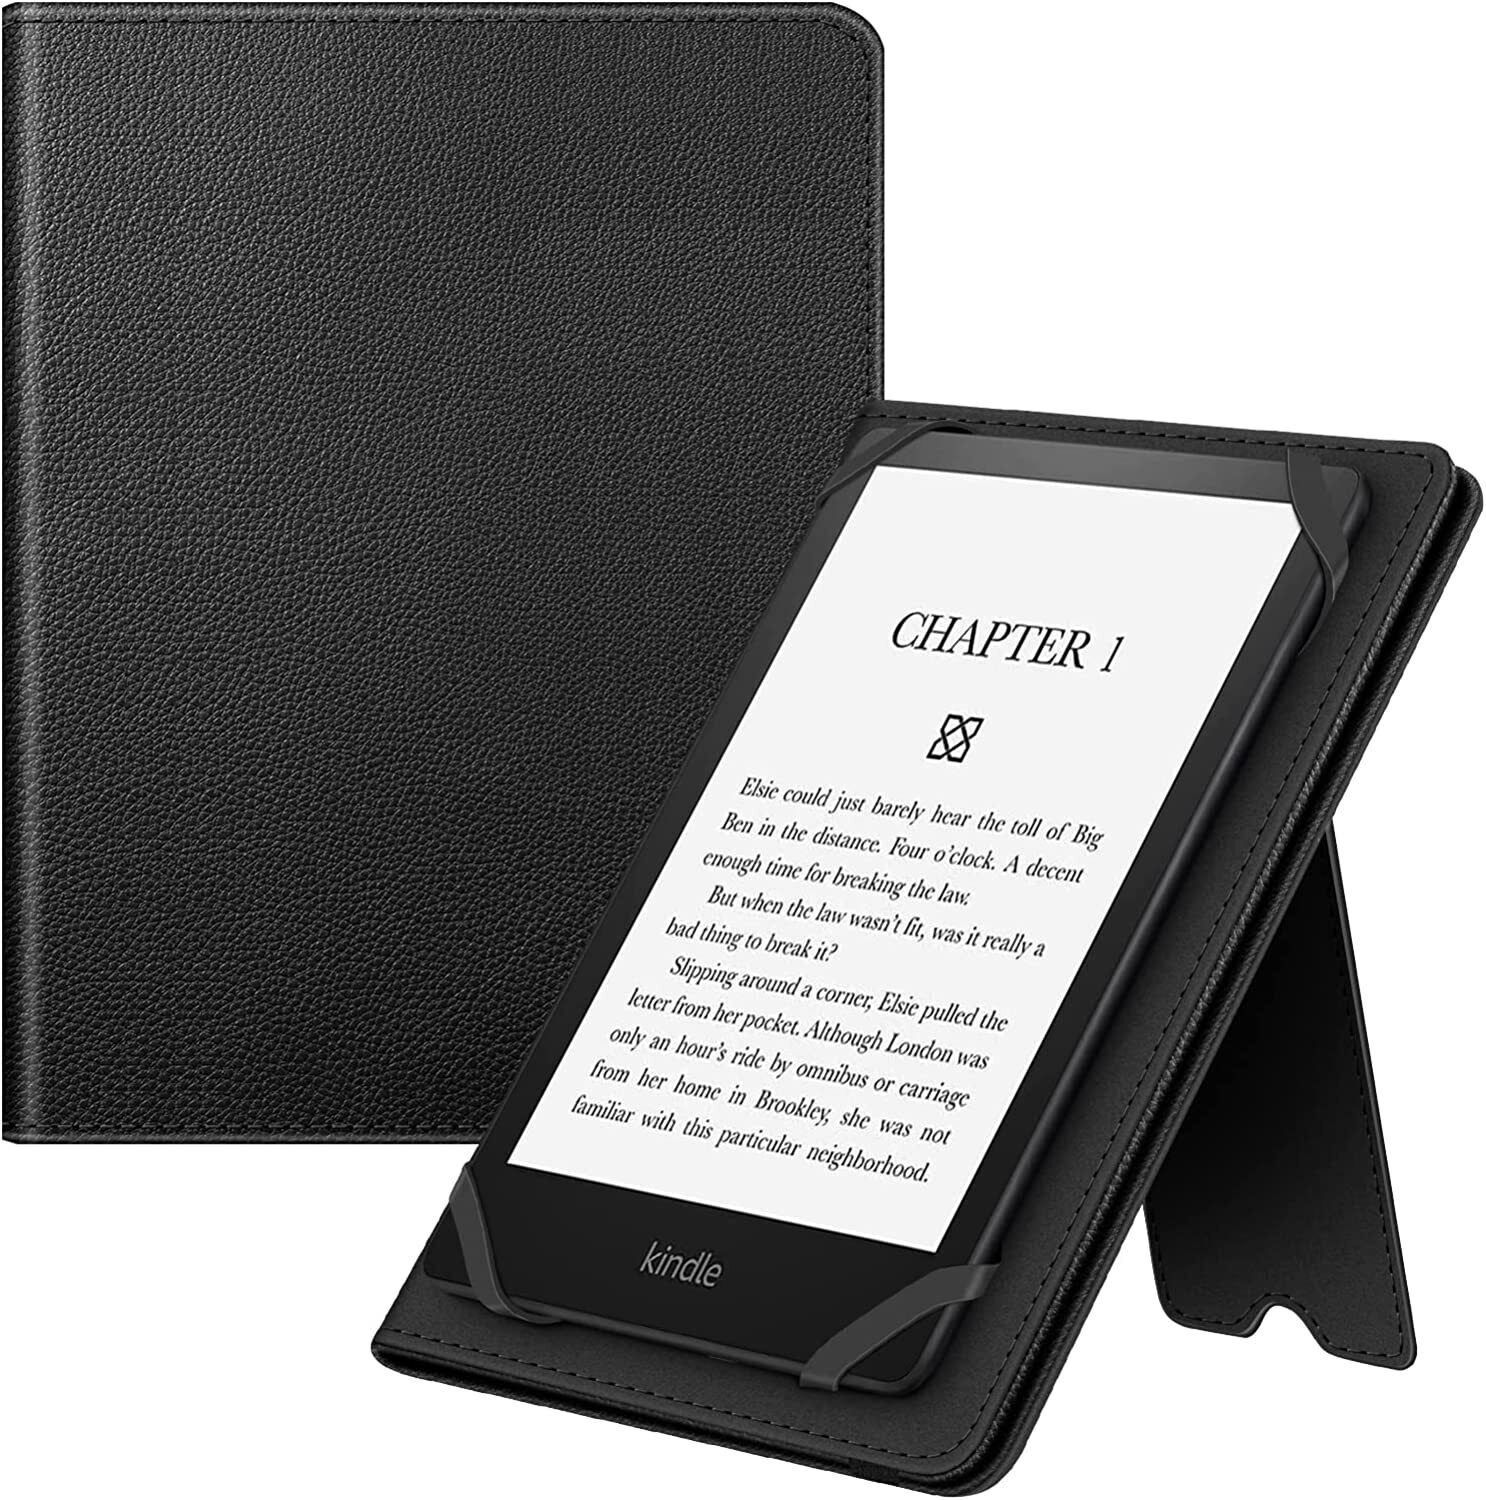 Universal Case for 6-7 Inch Tablet eReader Premium PU Leather Sleeve Stand Cover